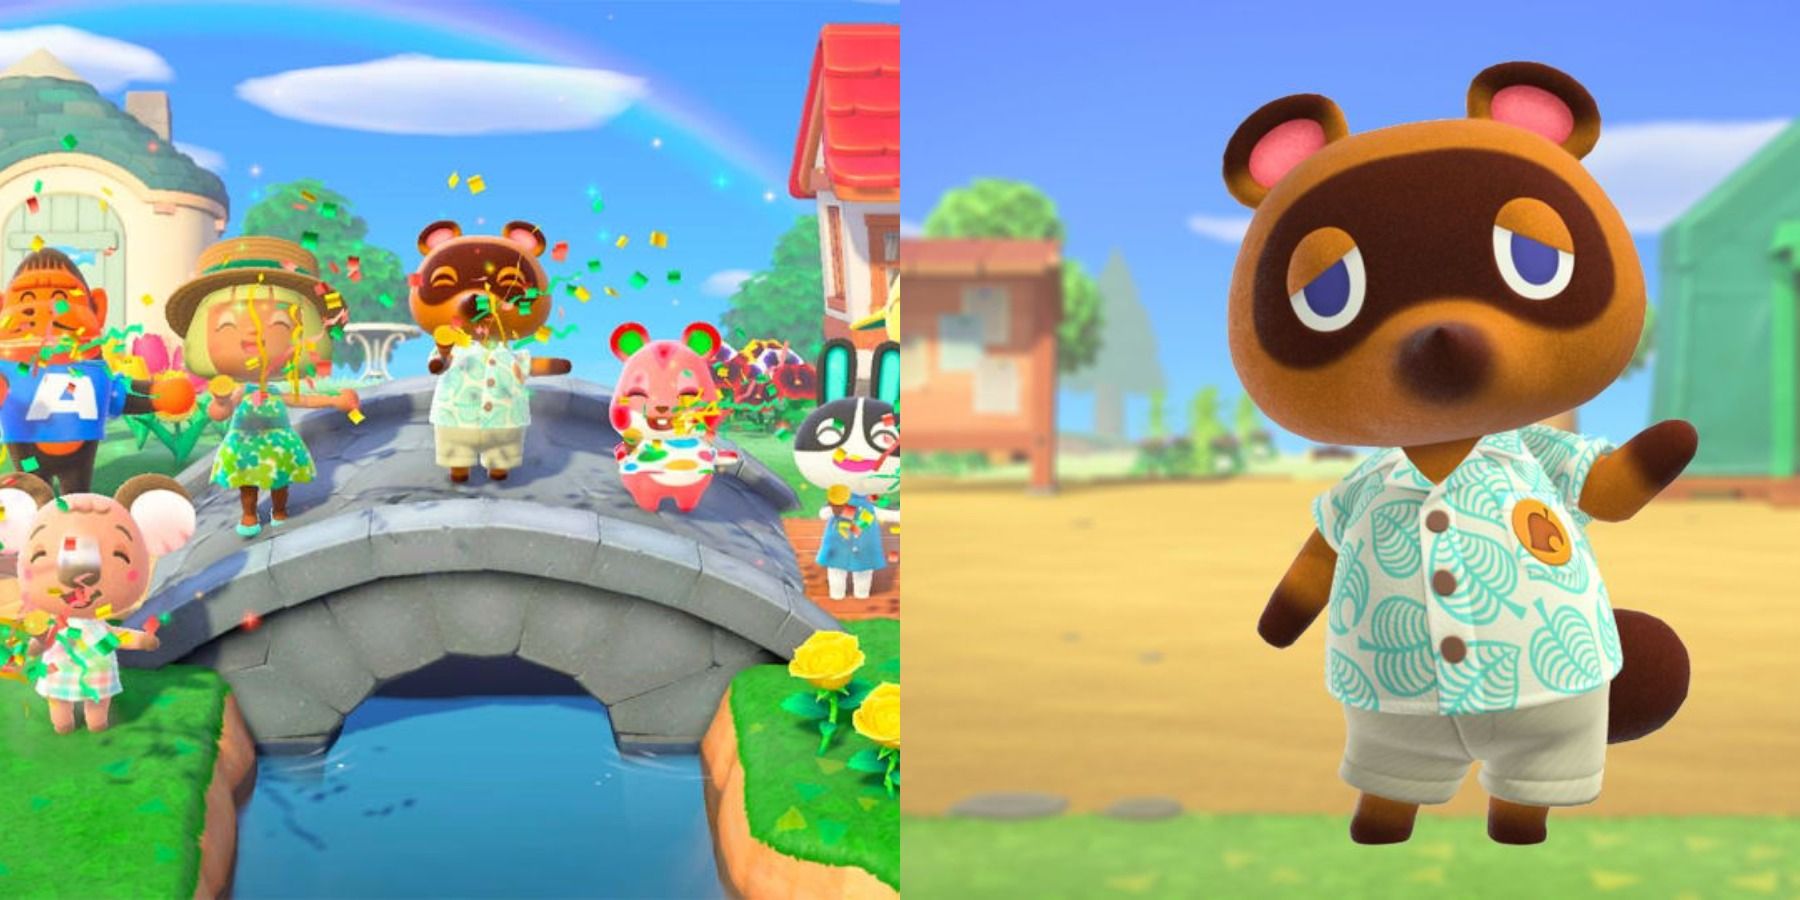 Tom Nook and other animals from Animal Crossing New Horizons.